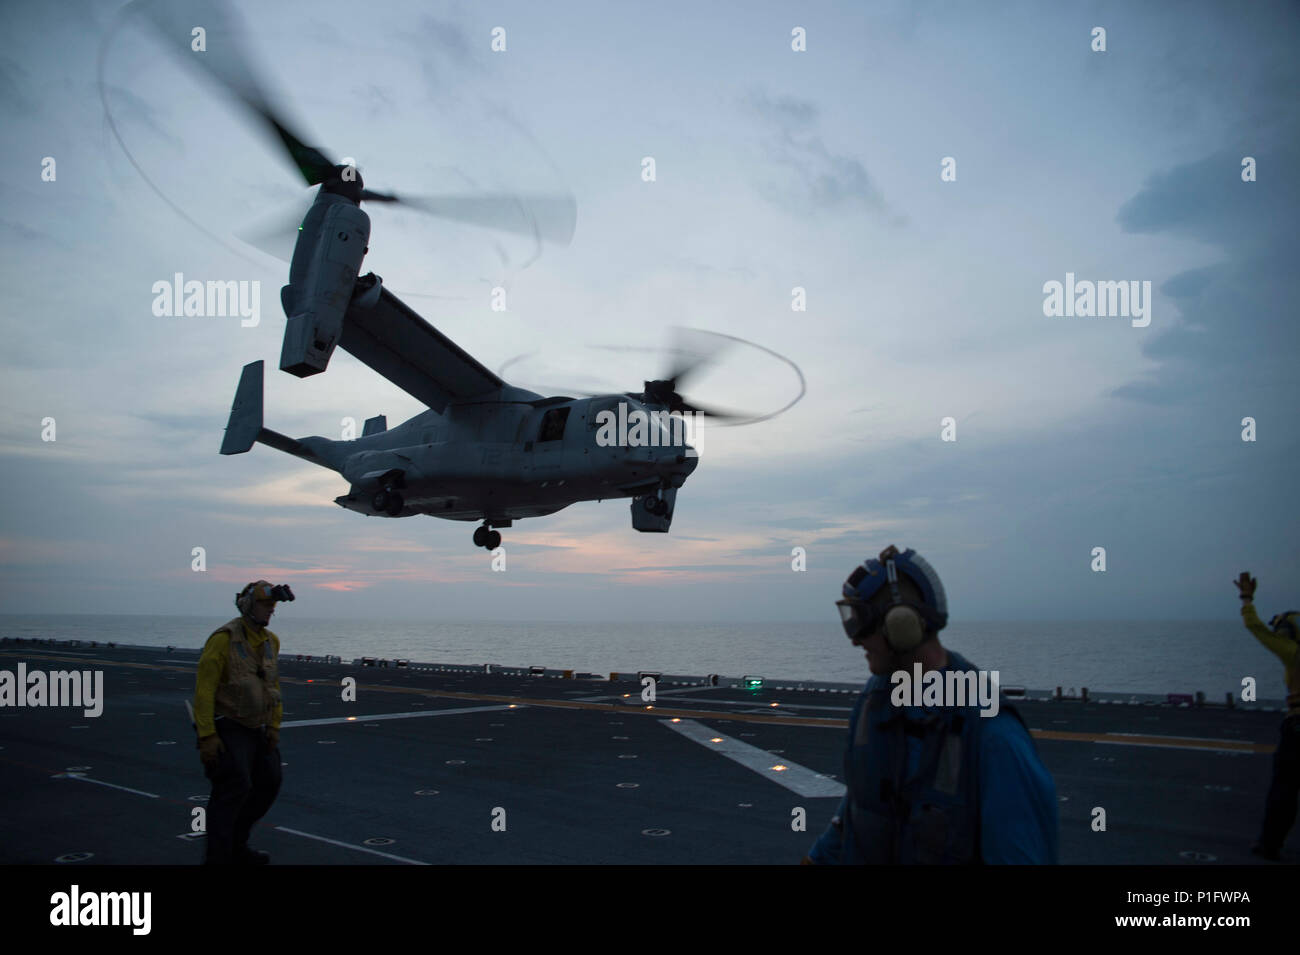 161022-N-XK809-096 SOUTH CHINA SEA (Oct. 22, 2016) An MV-22 Osprey, assigned to the Flying Tigers of Marine Medium Tiltrotor Squadron (VMM) 262, takes off from the flight deck of amphibious assault ship USS Bonhomme Richard (LHD 6). Bonhomme Richard, flagship of the Bonhomme Richard Expeditionary Strike Group, is operating in the South China Sea in support of security and stability in the Indo-Asia Pacific region. (U.S. Navy photo by Petty Officer 3rd Class William Sykes/Released) Stock Photo